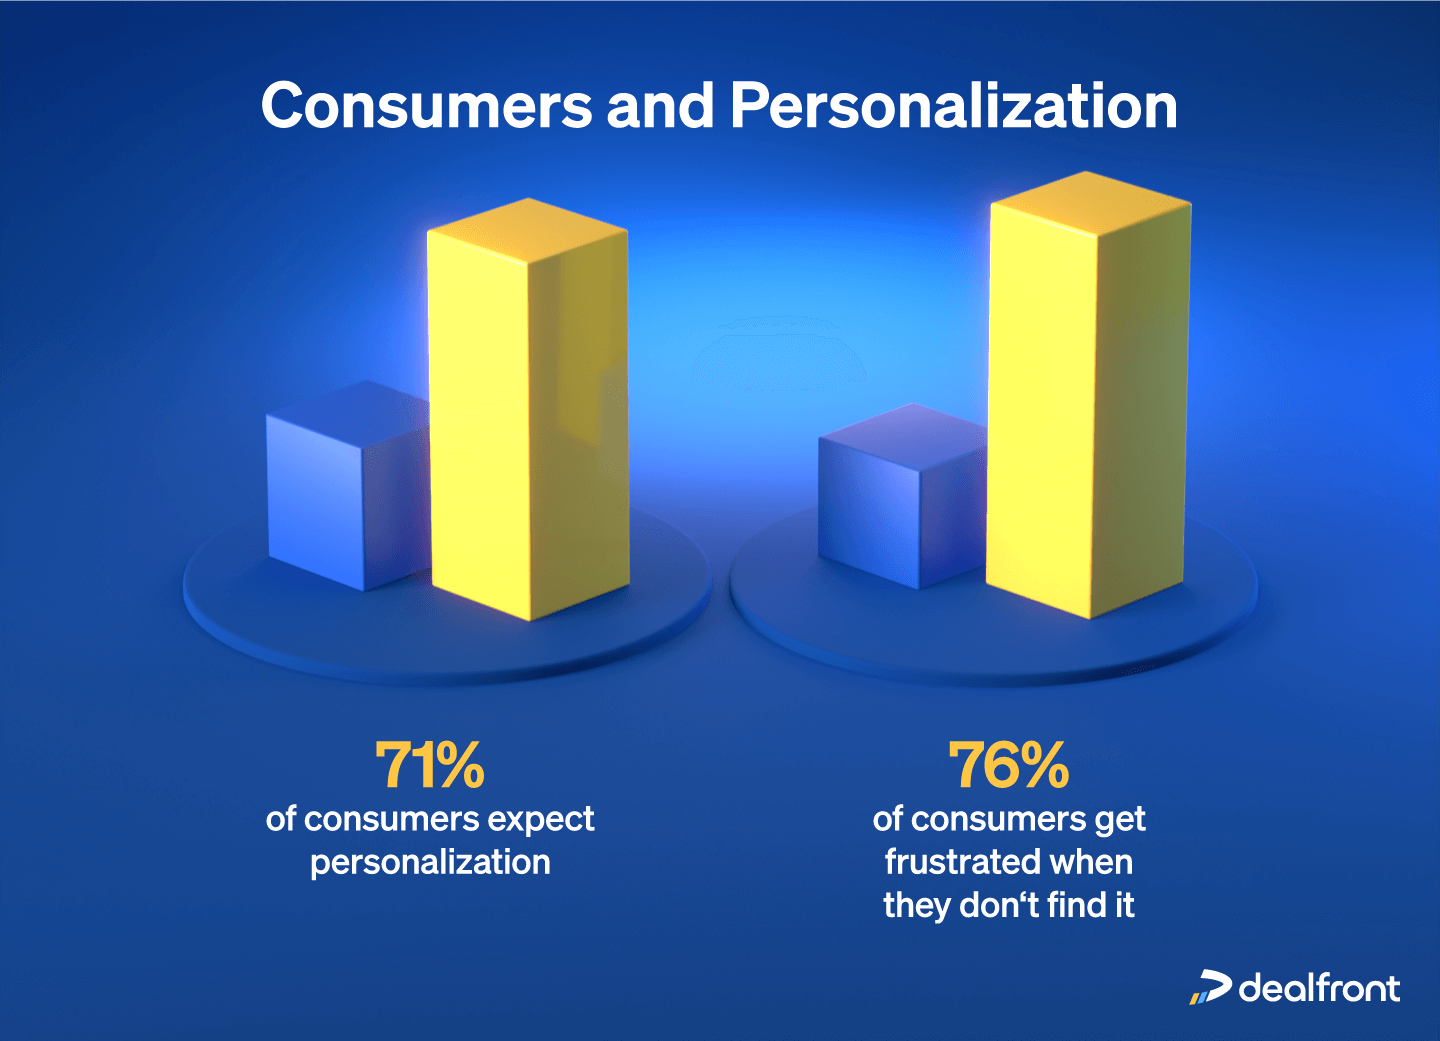 Customers and personalization